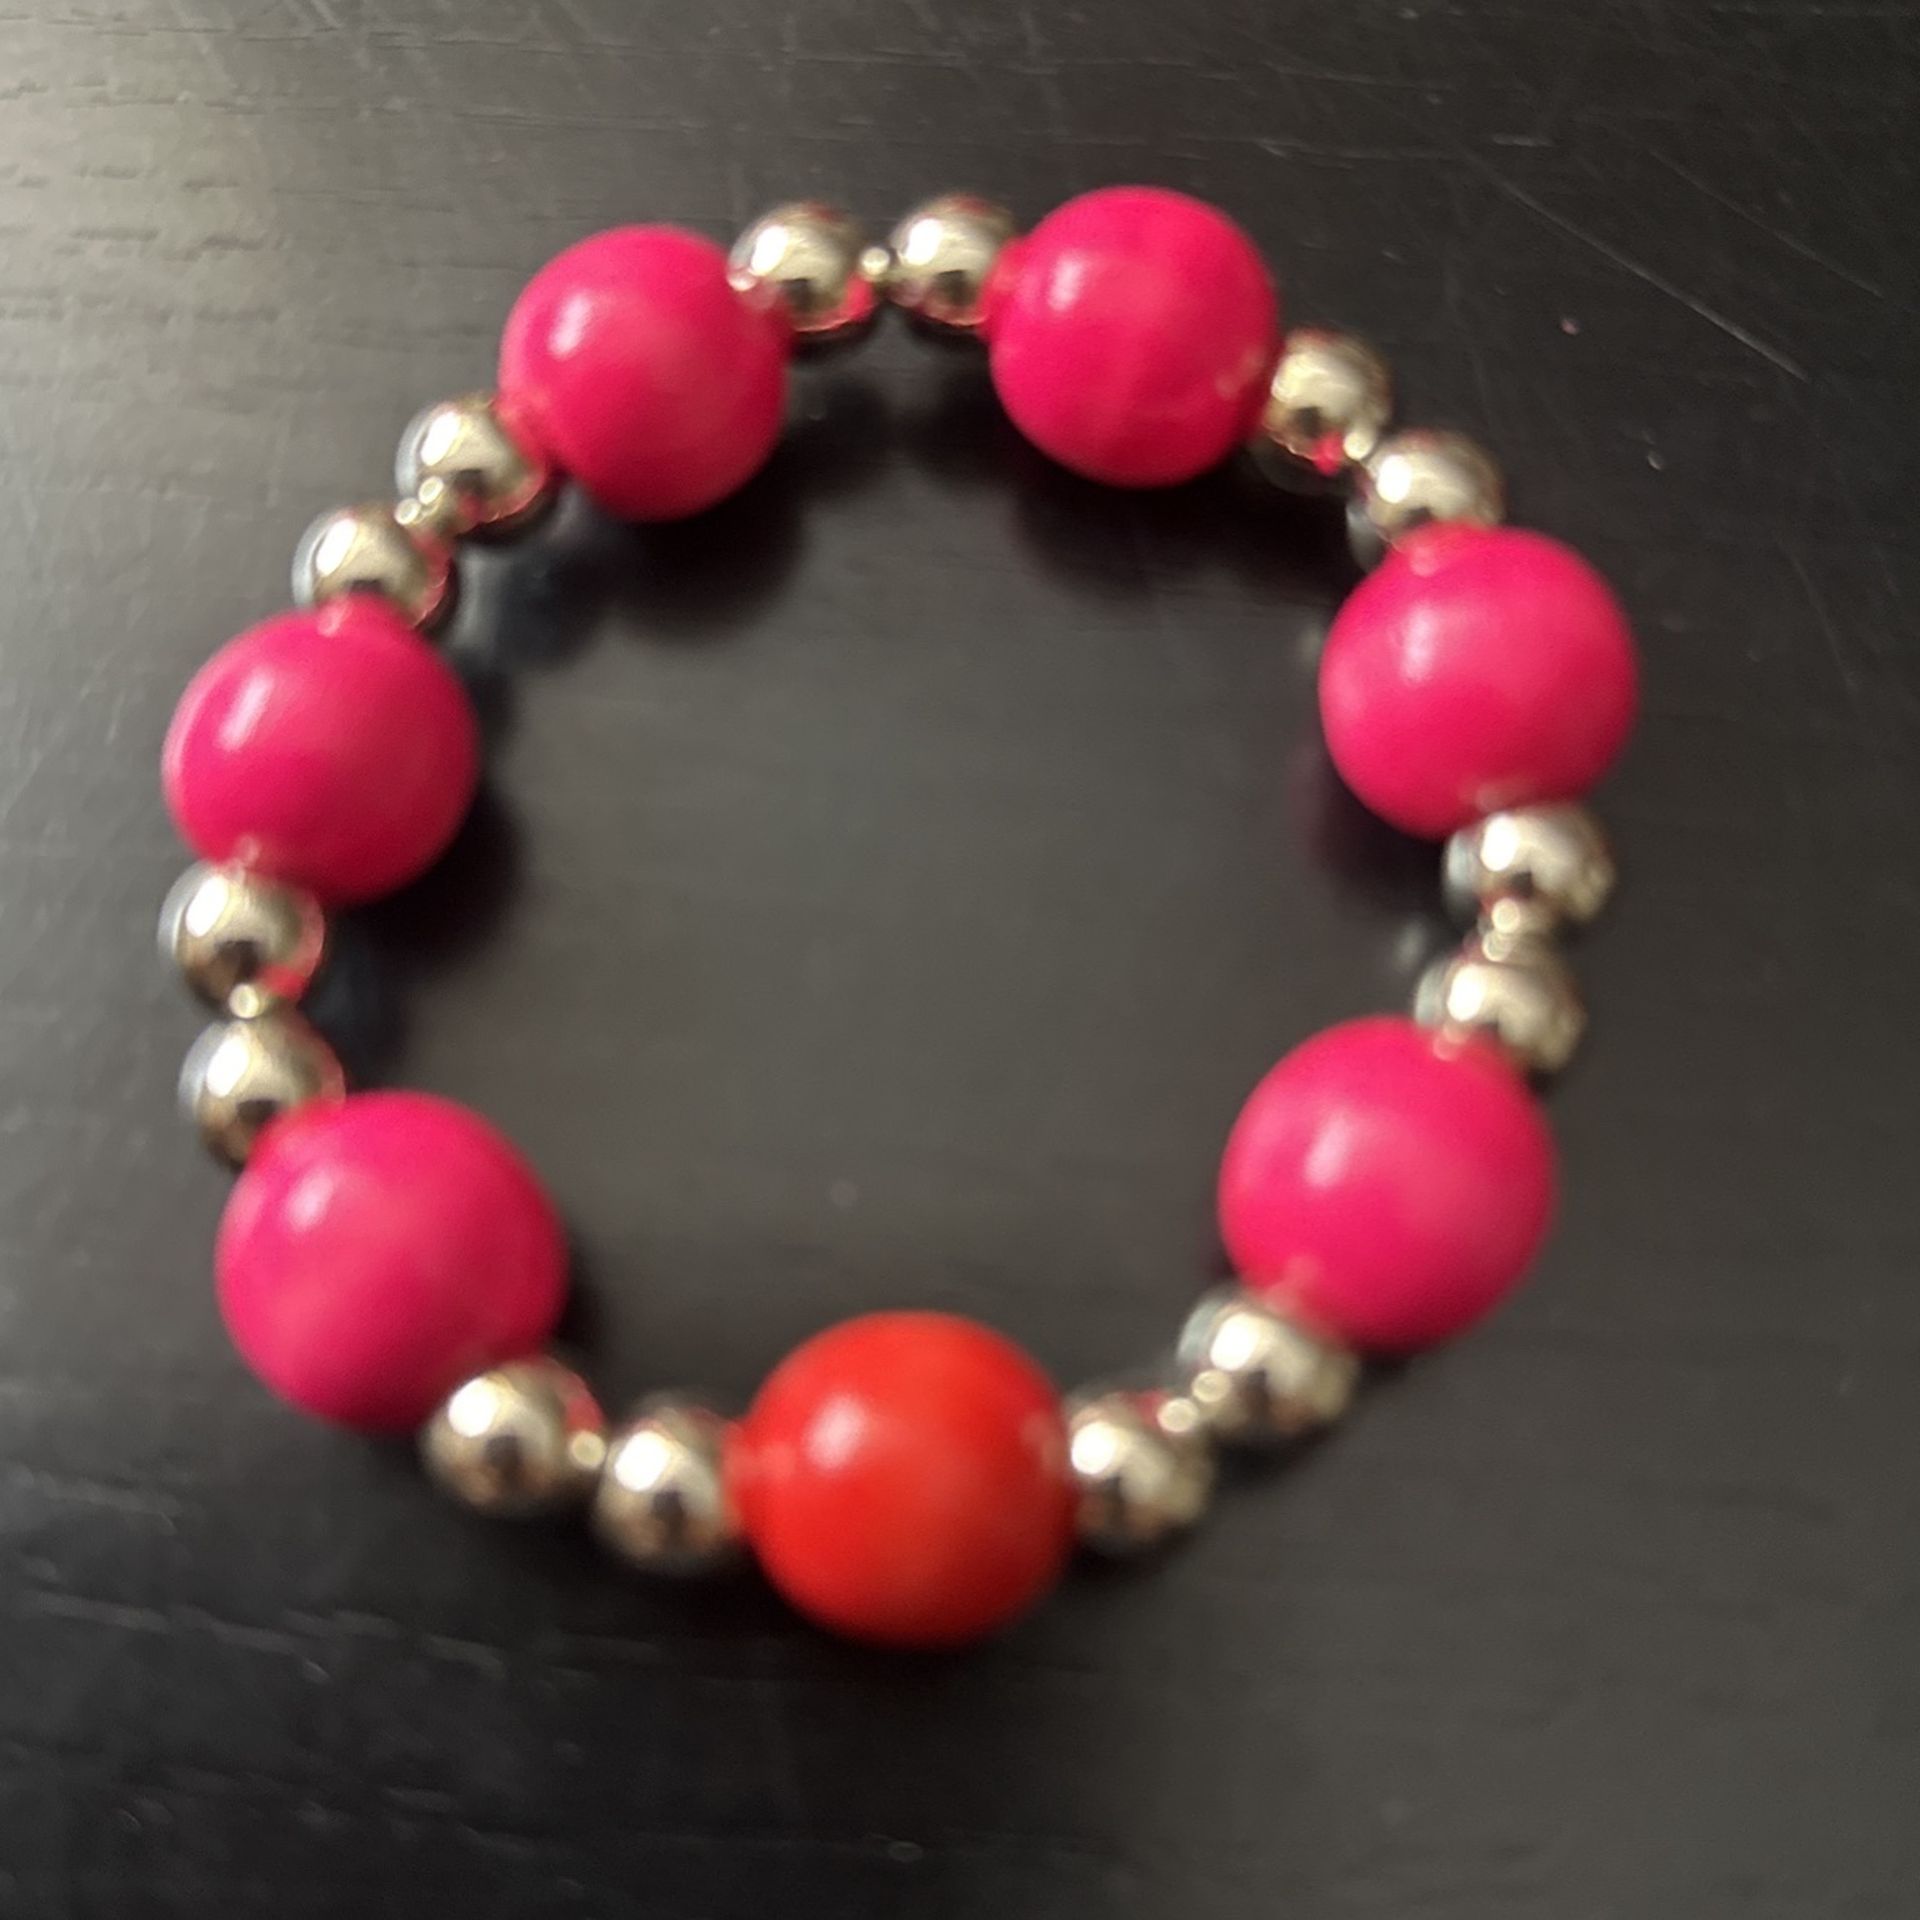 Pink Wood Beads With Small Silver Beads Bracelet